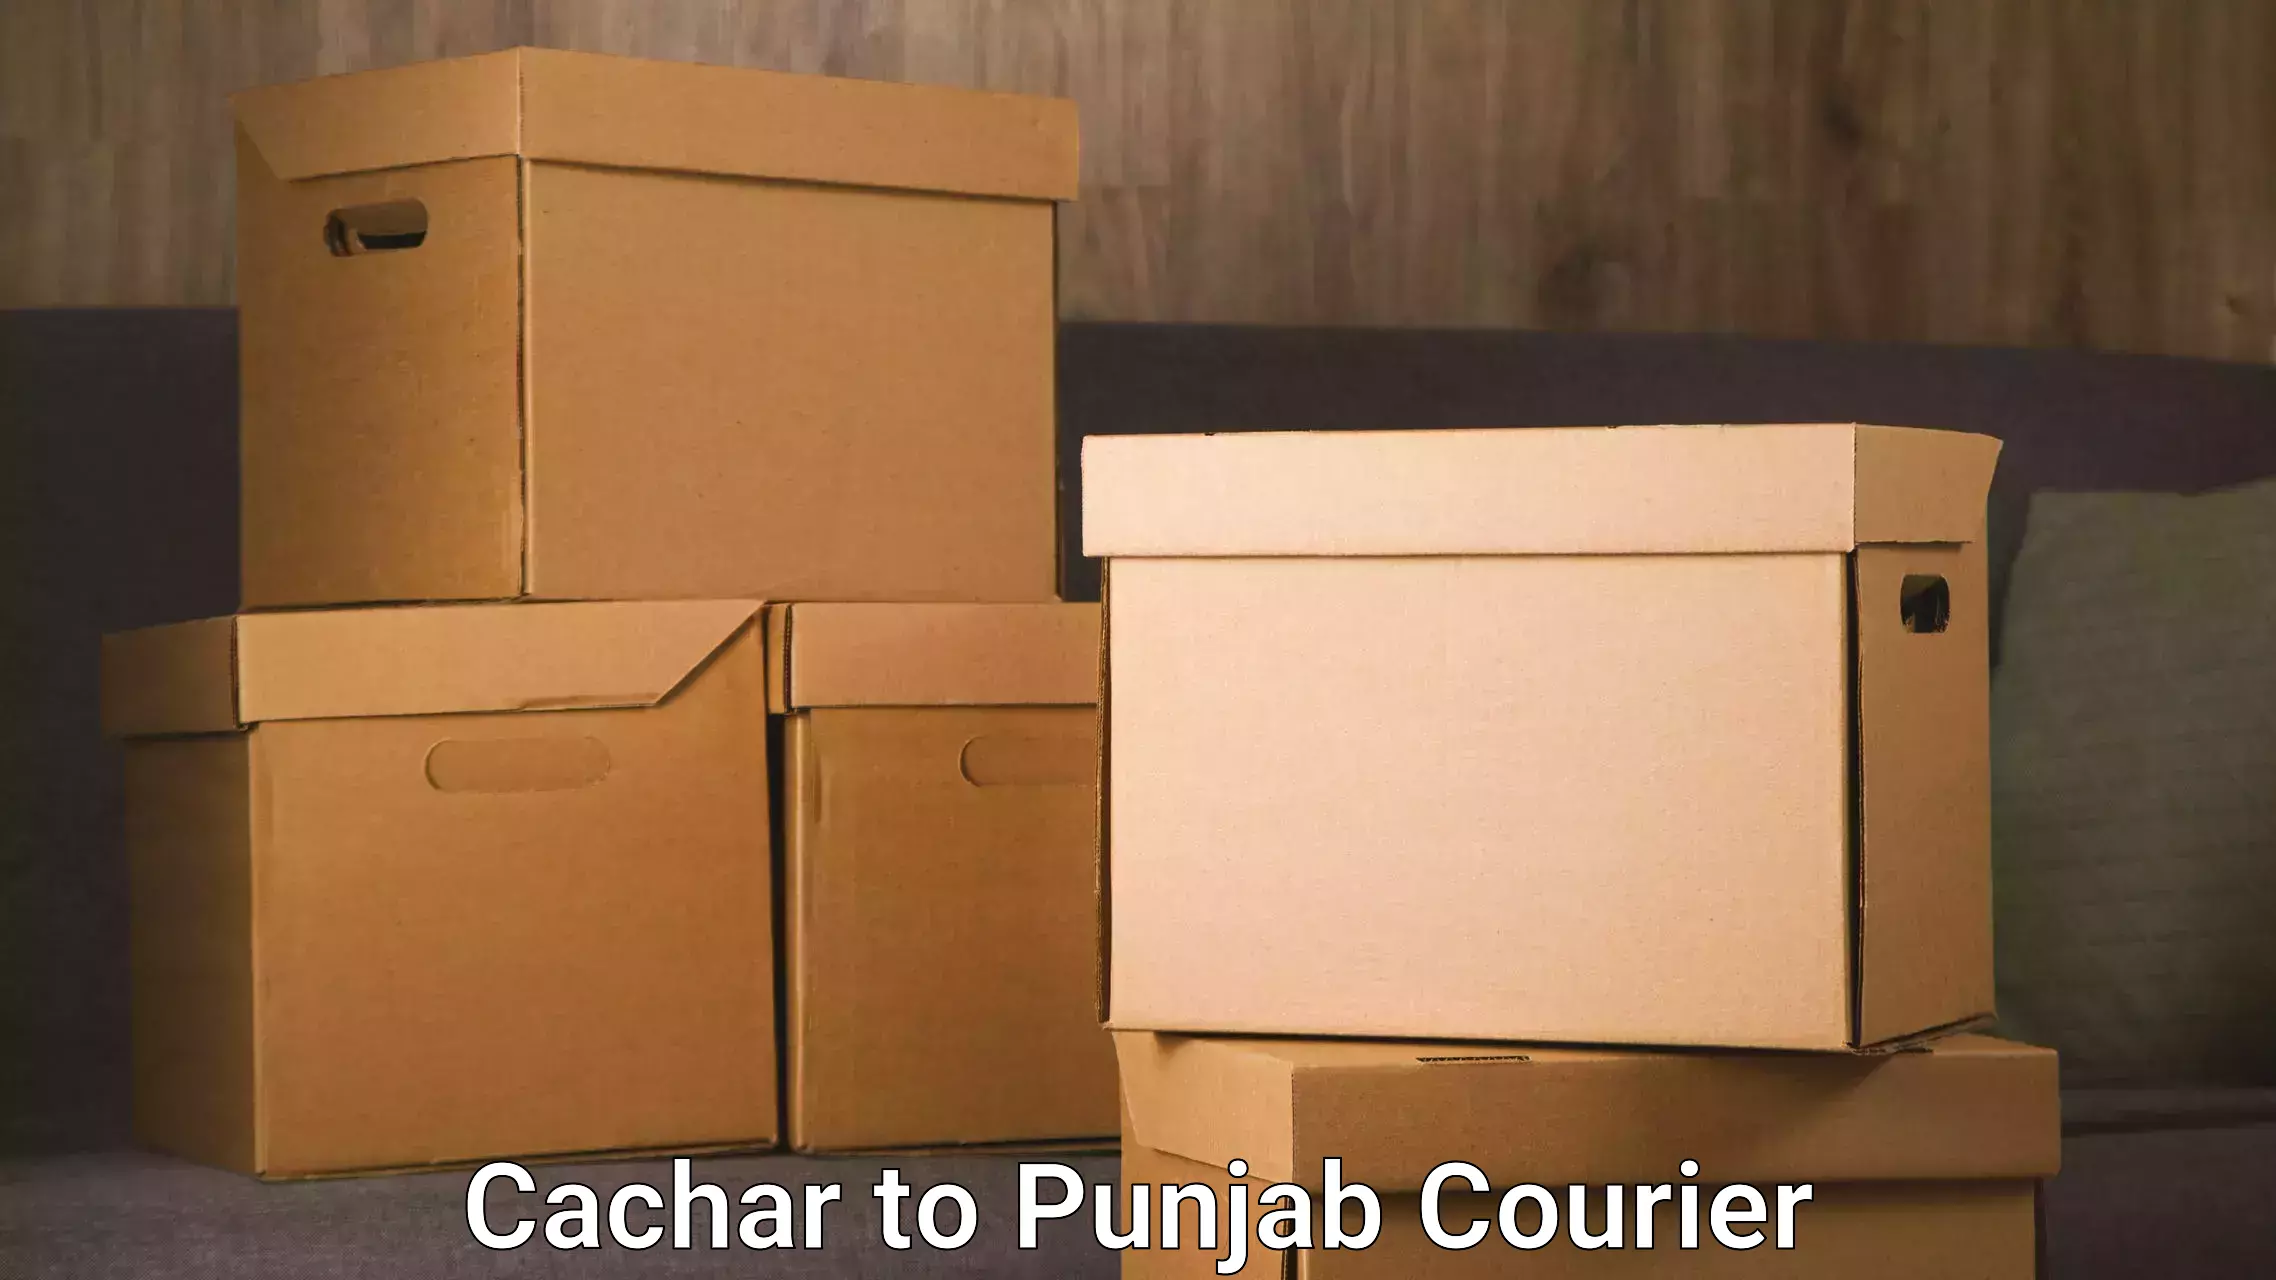 Track and trace shipping Cachar to Goindwal Sahib